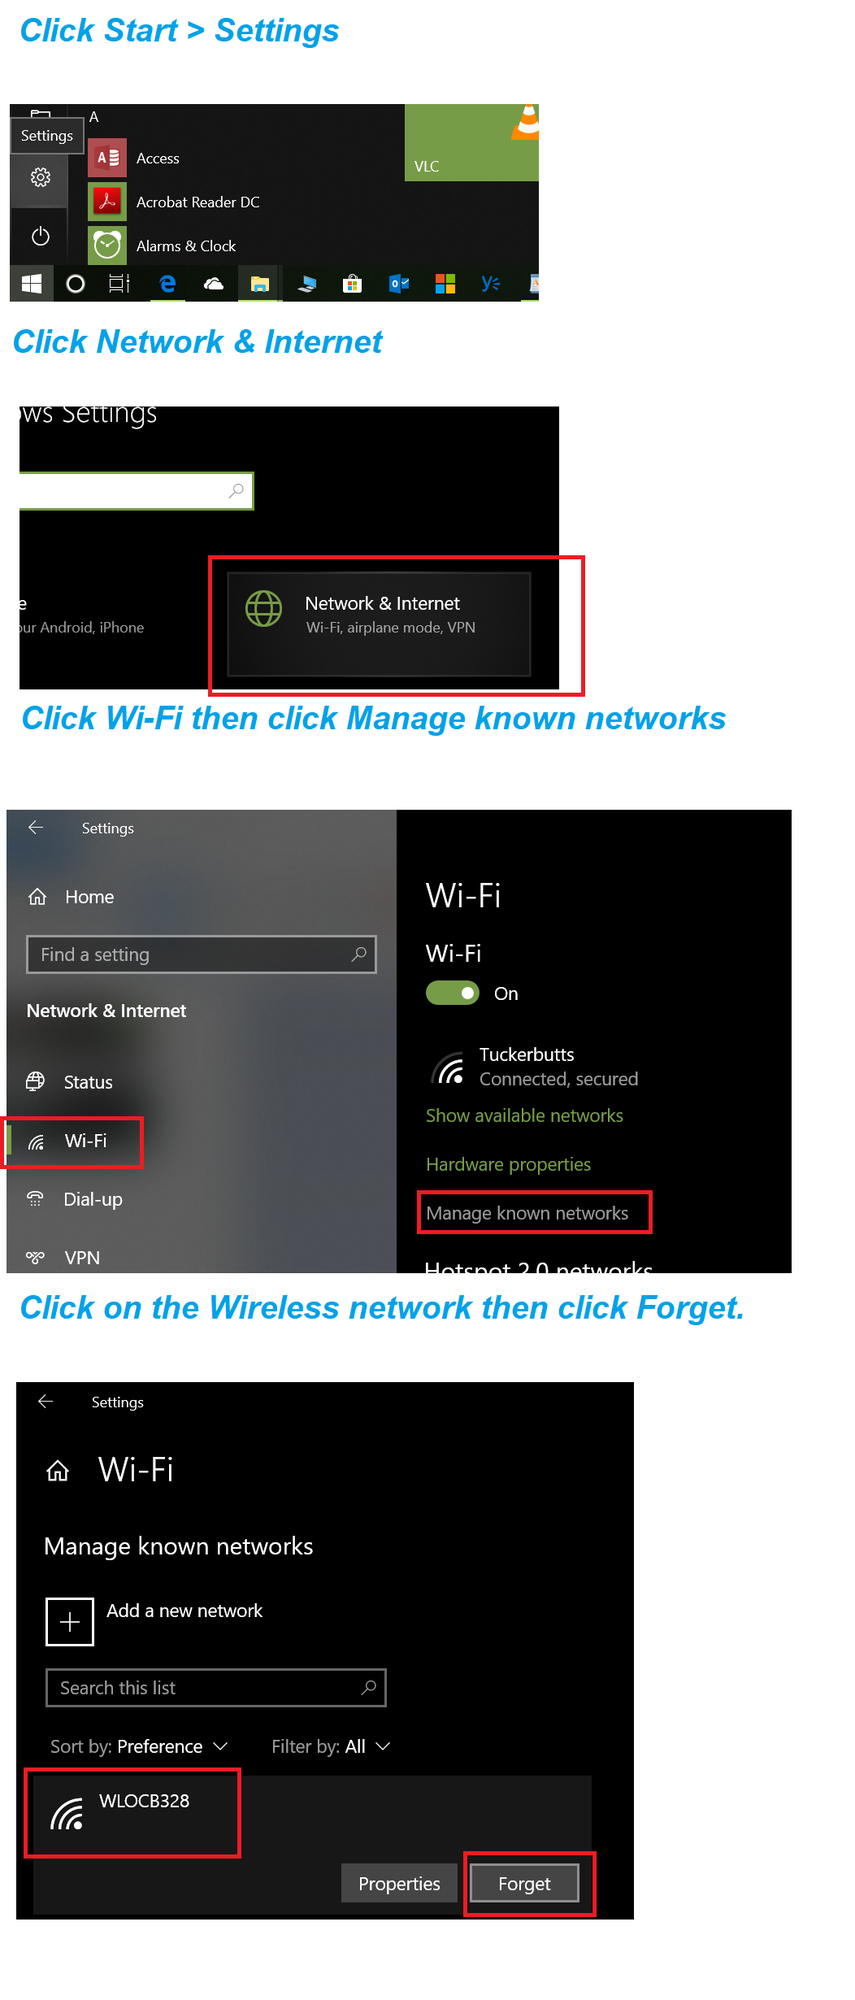 Easy Guide: How to Forget a Wireless Network in Windows 10 dfa5e384-5423-43bc-8ce9-00f14aefc4c3?upload=true.png